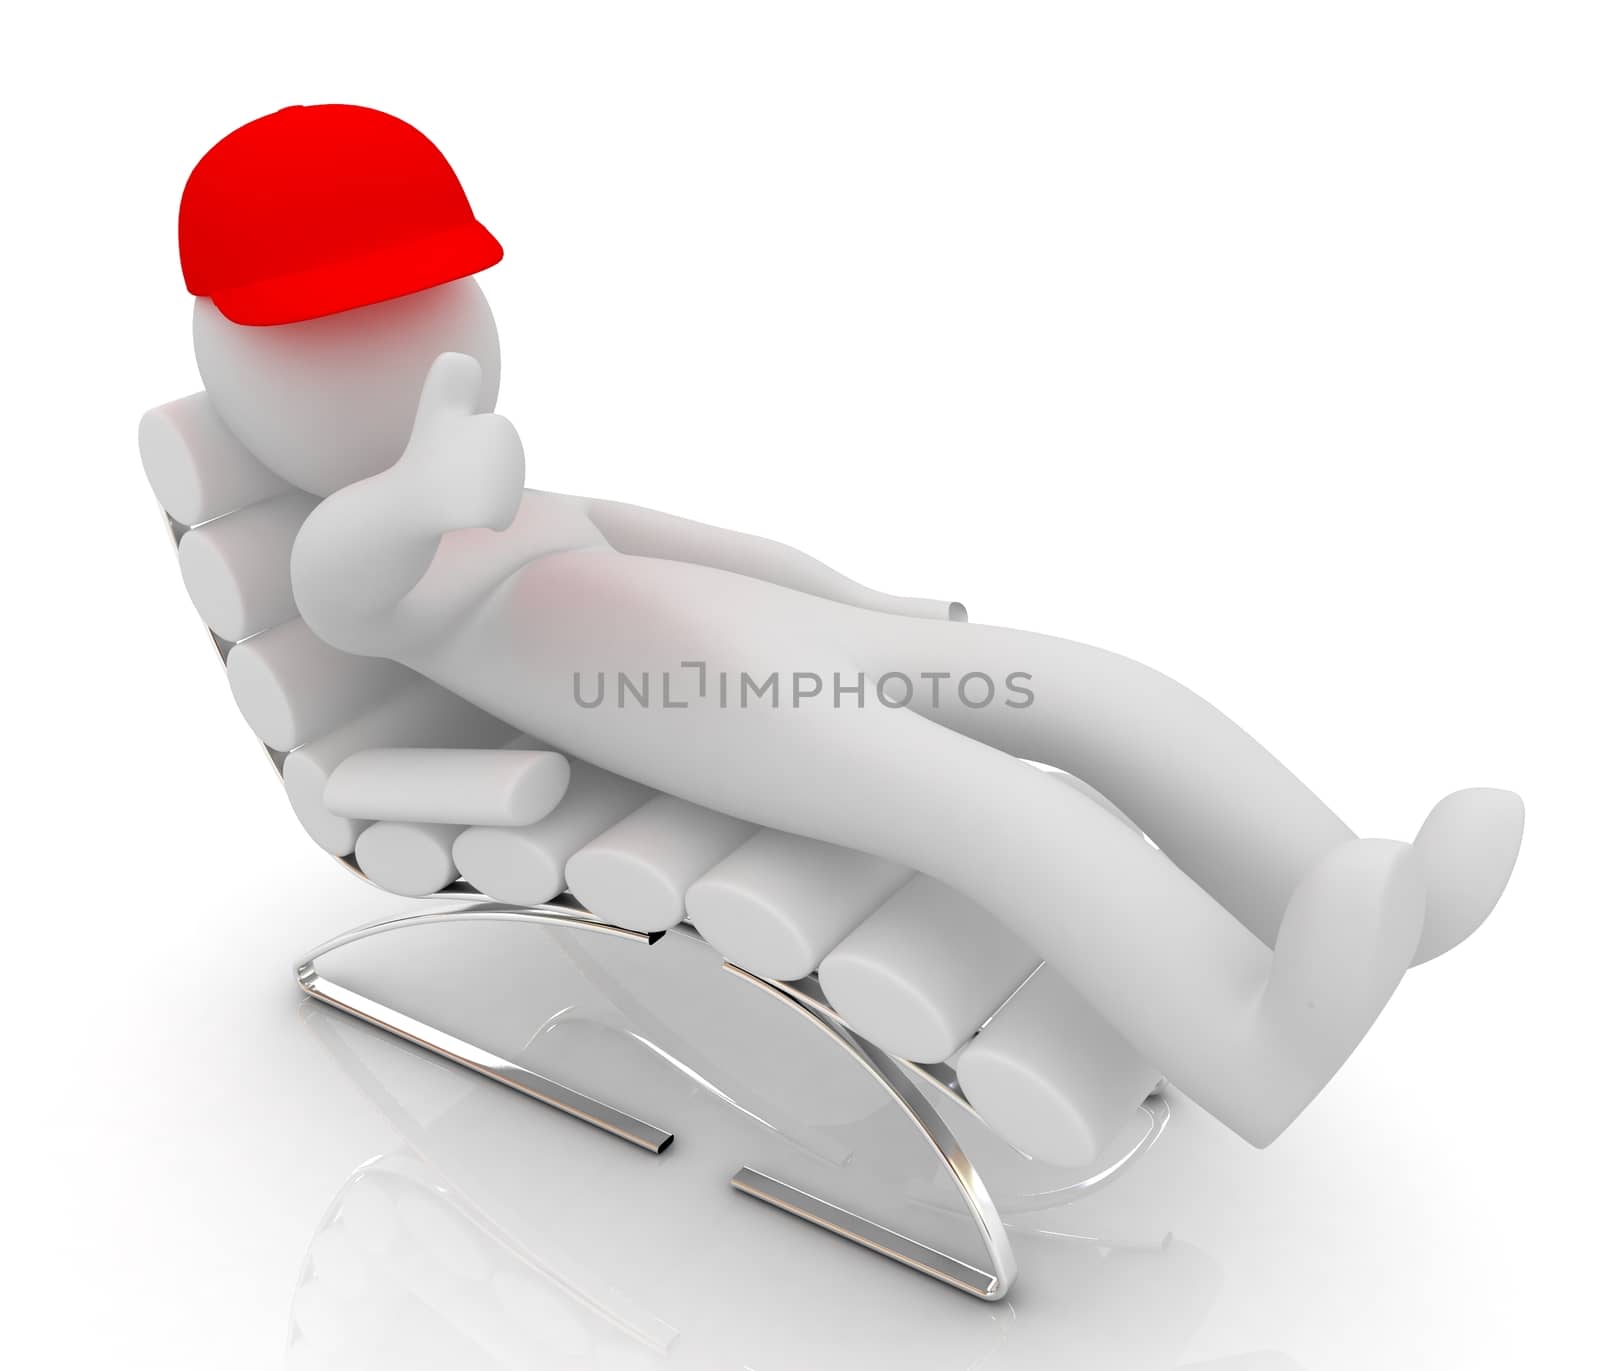 3d white man lying chair with thumb up on white background 